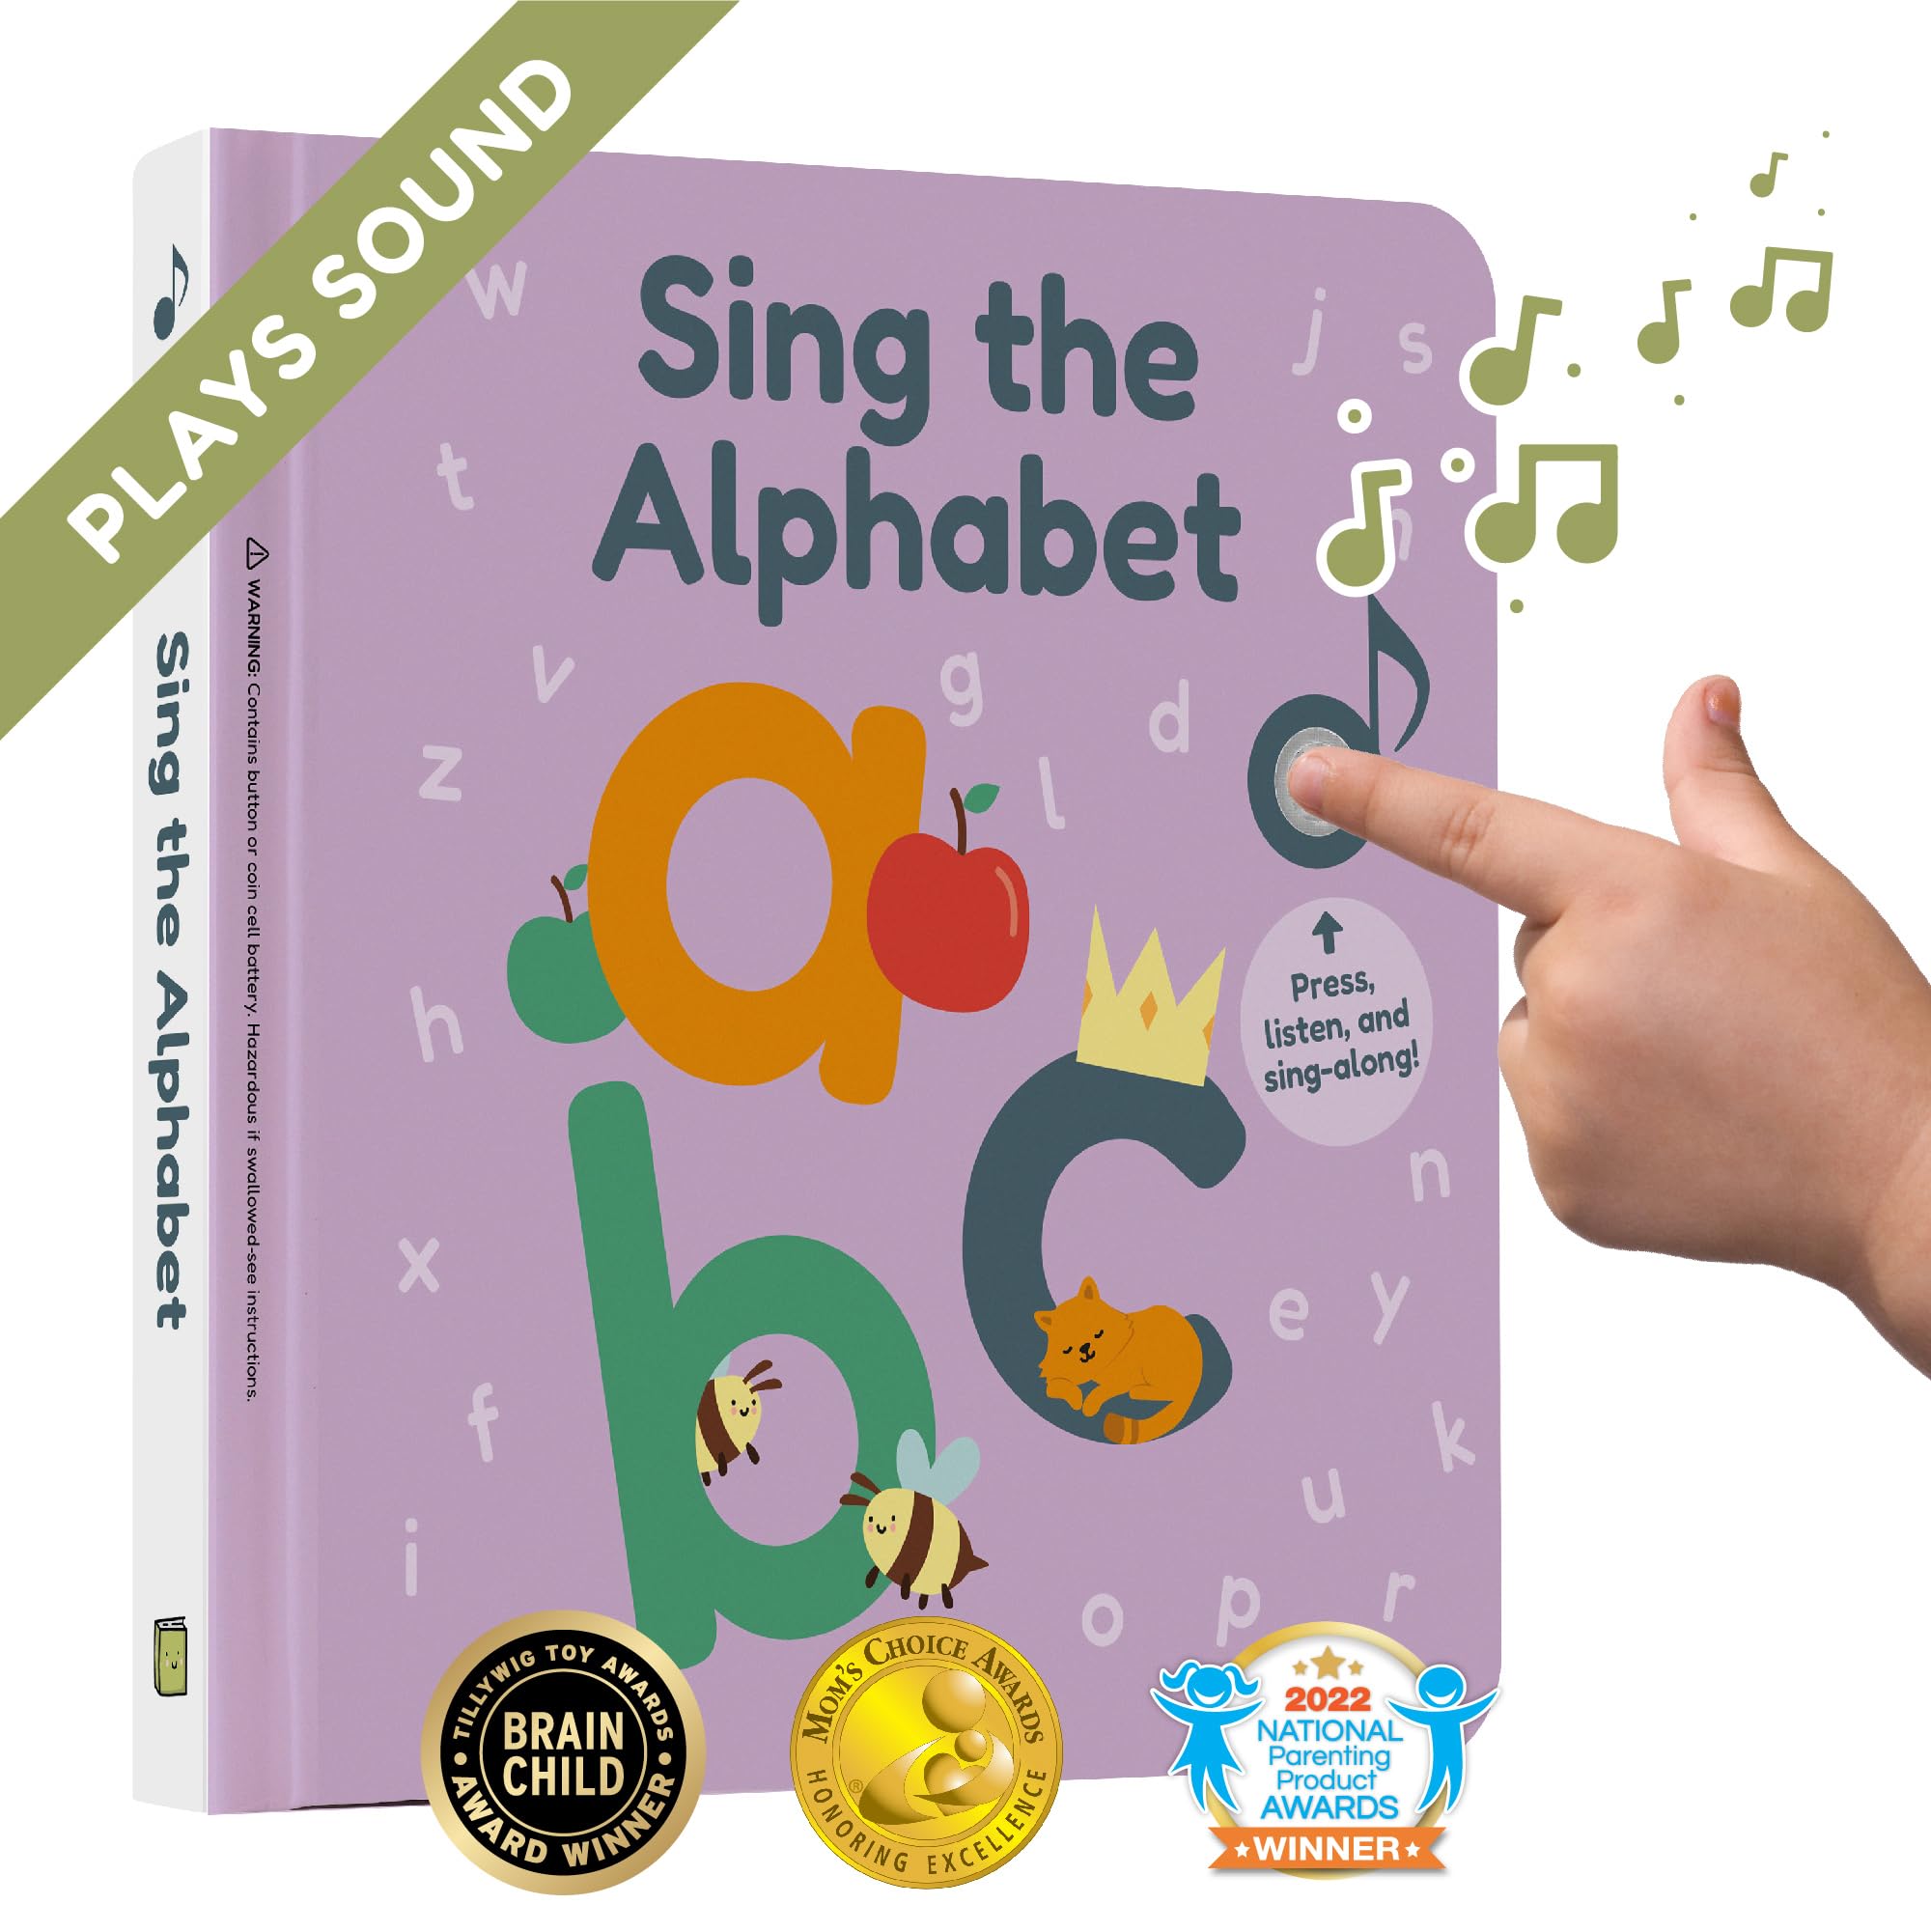 Cali's ABC Learning Book